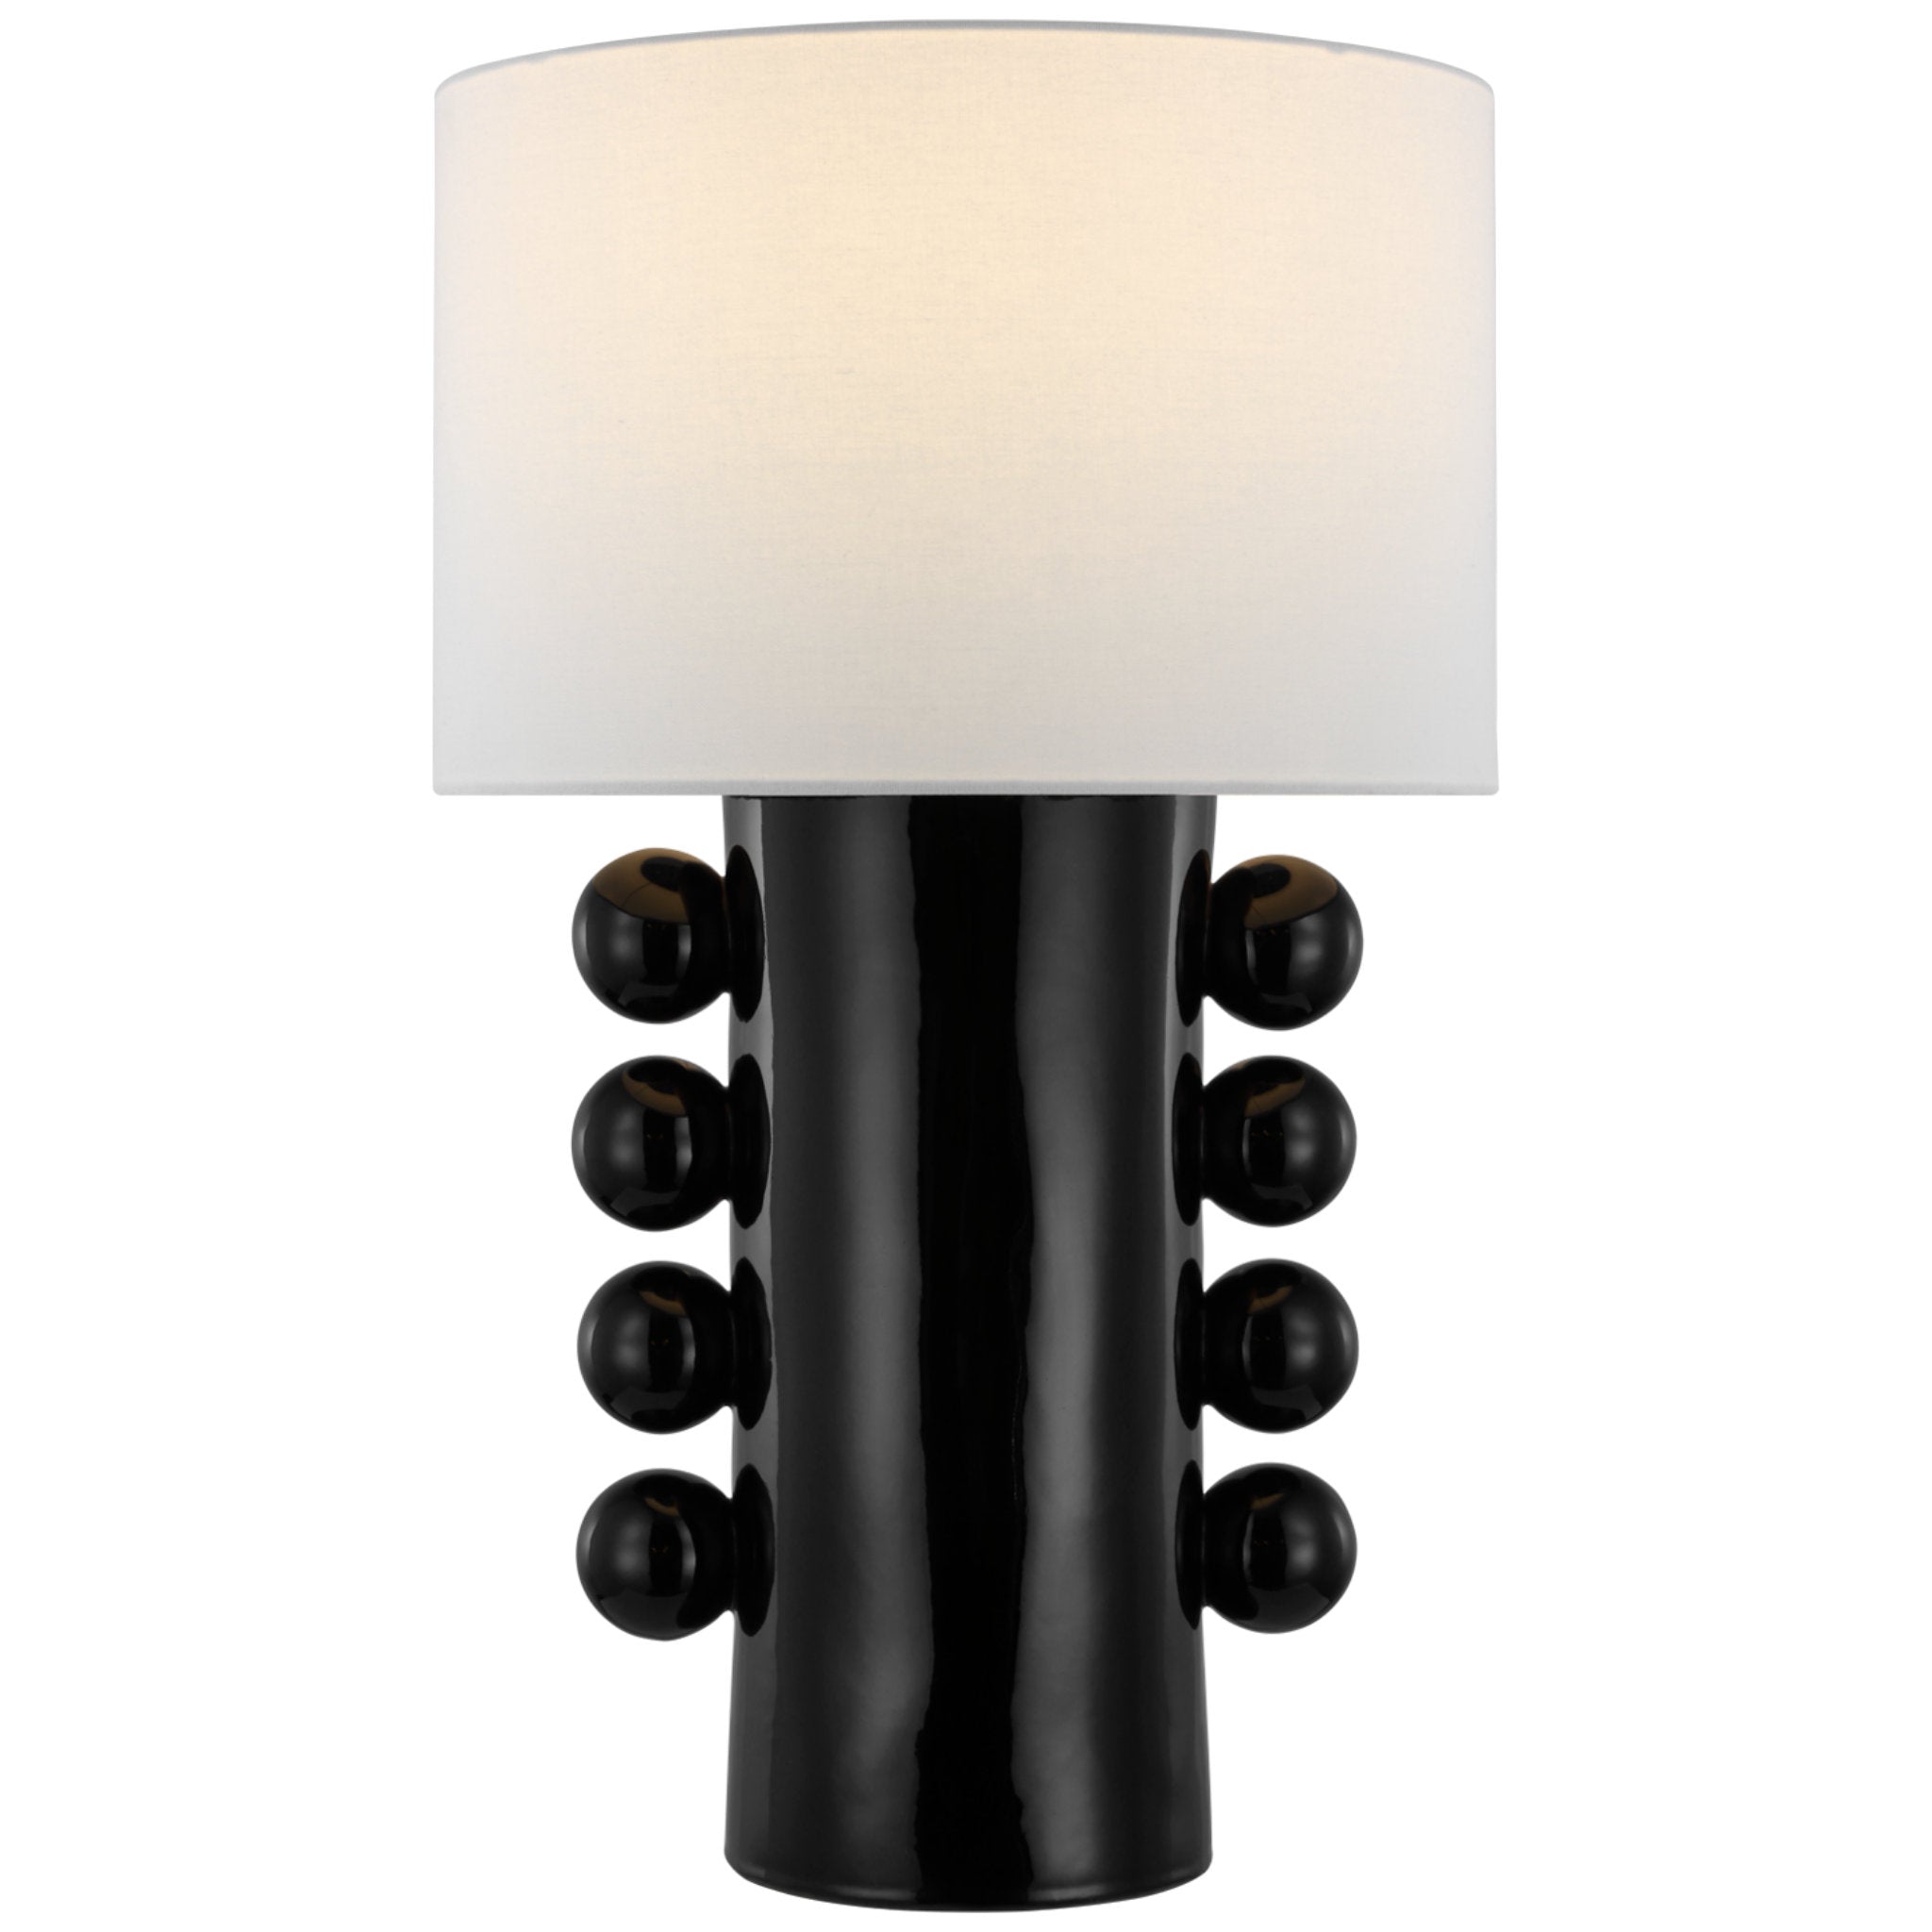 Kelly Wearstler Tiglia Tall Table Lamp in Black with Linen Shade